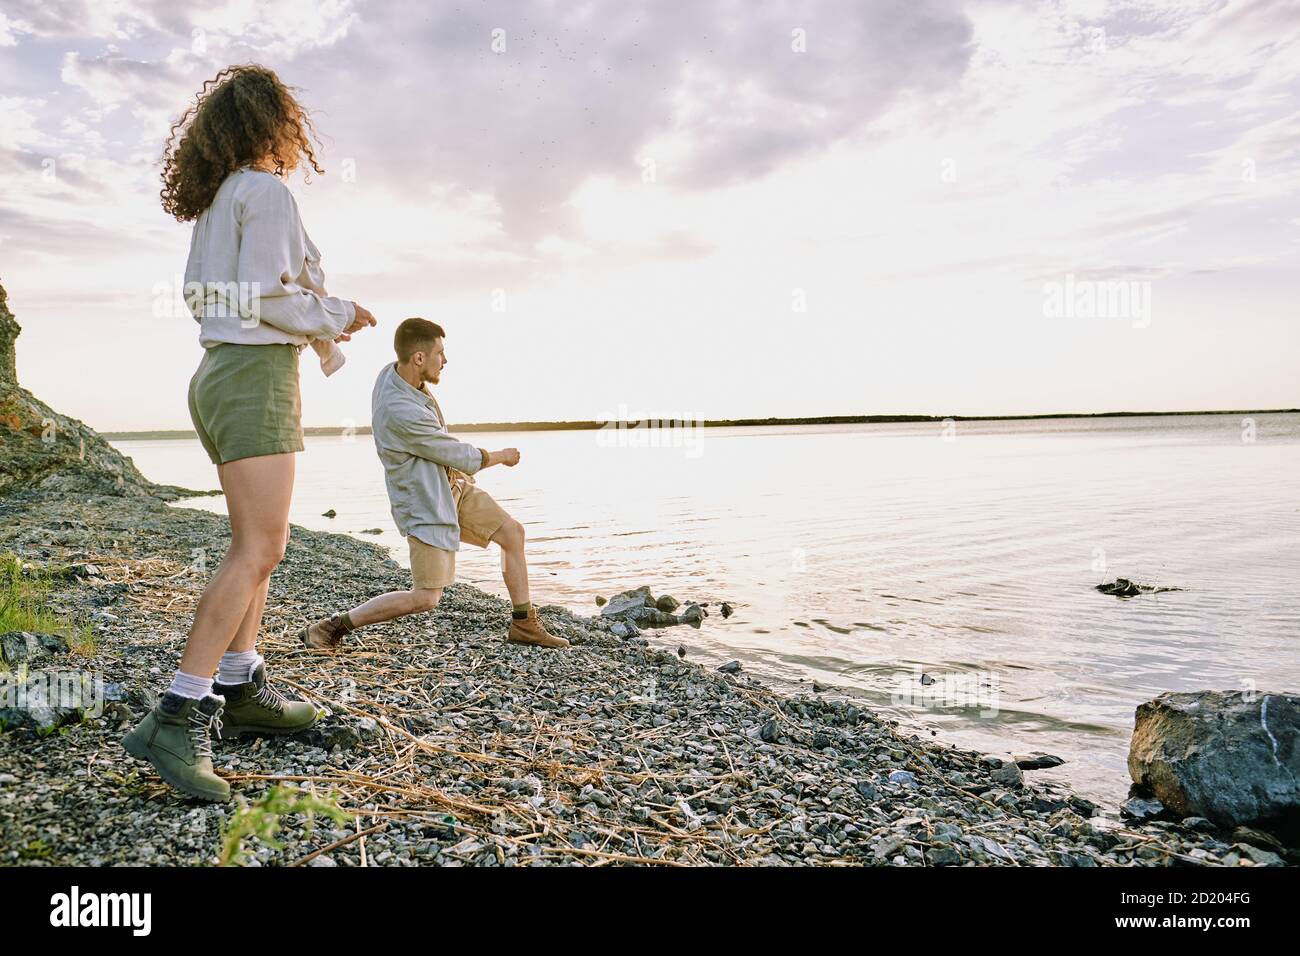 Young man standing with girlfriend at lake shore and throwing stones in water while his girlfriend looking at him Stock Photo